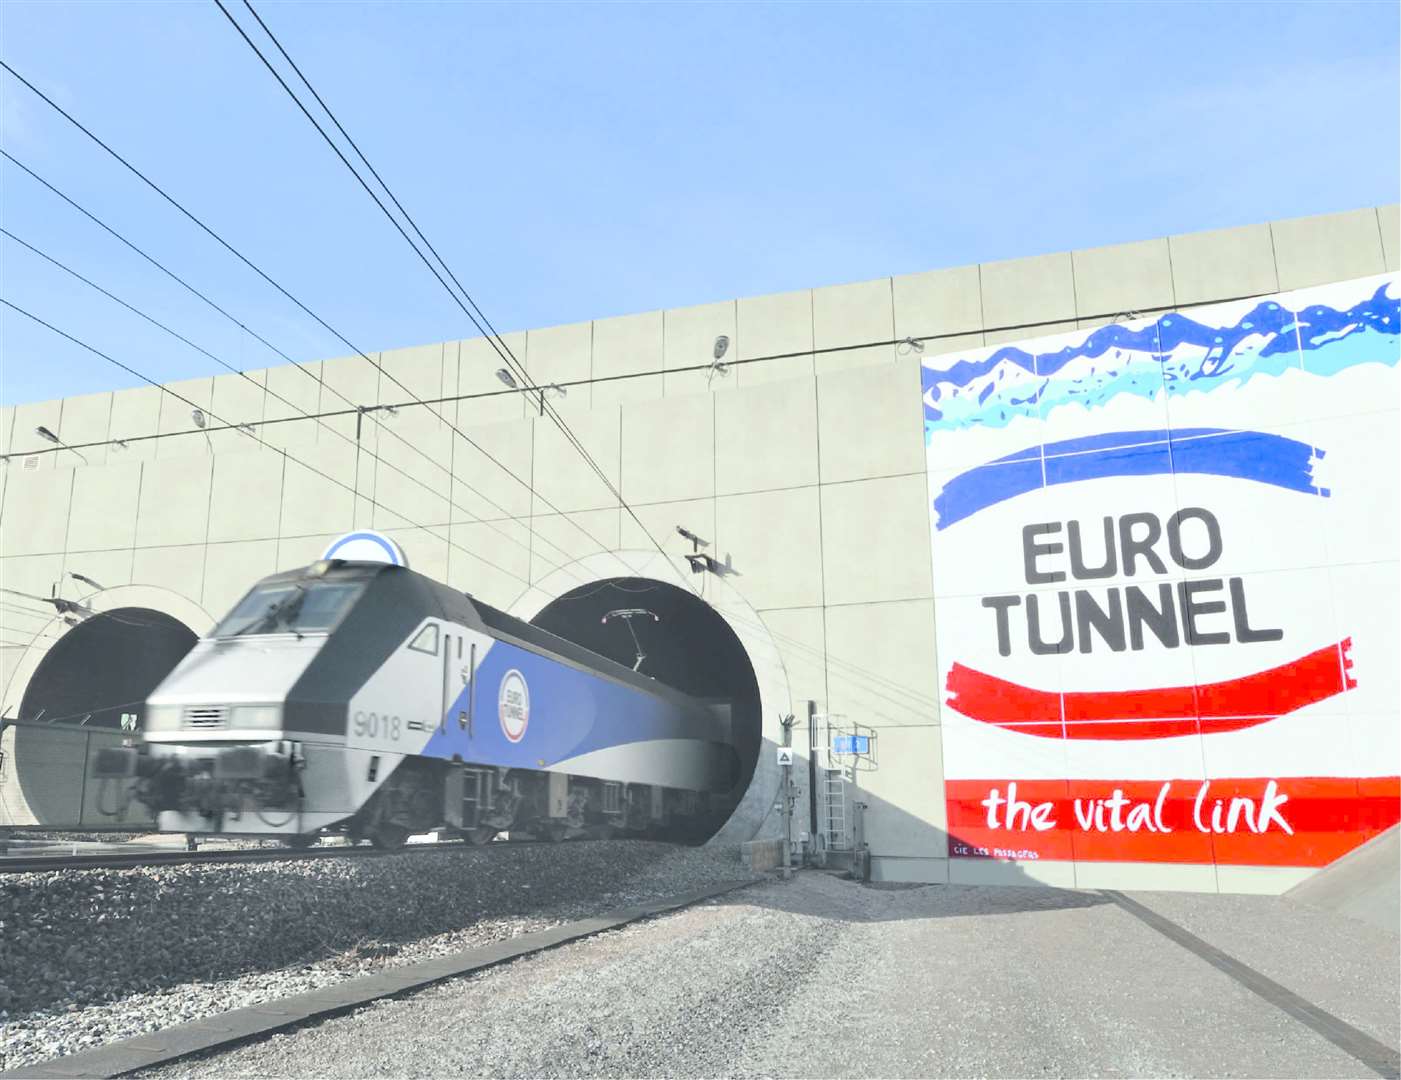 Eurotunnel has seen a significant dip in revenues due to the Covid crisis